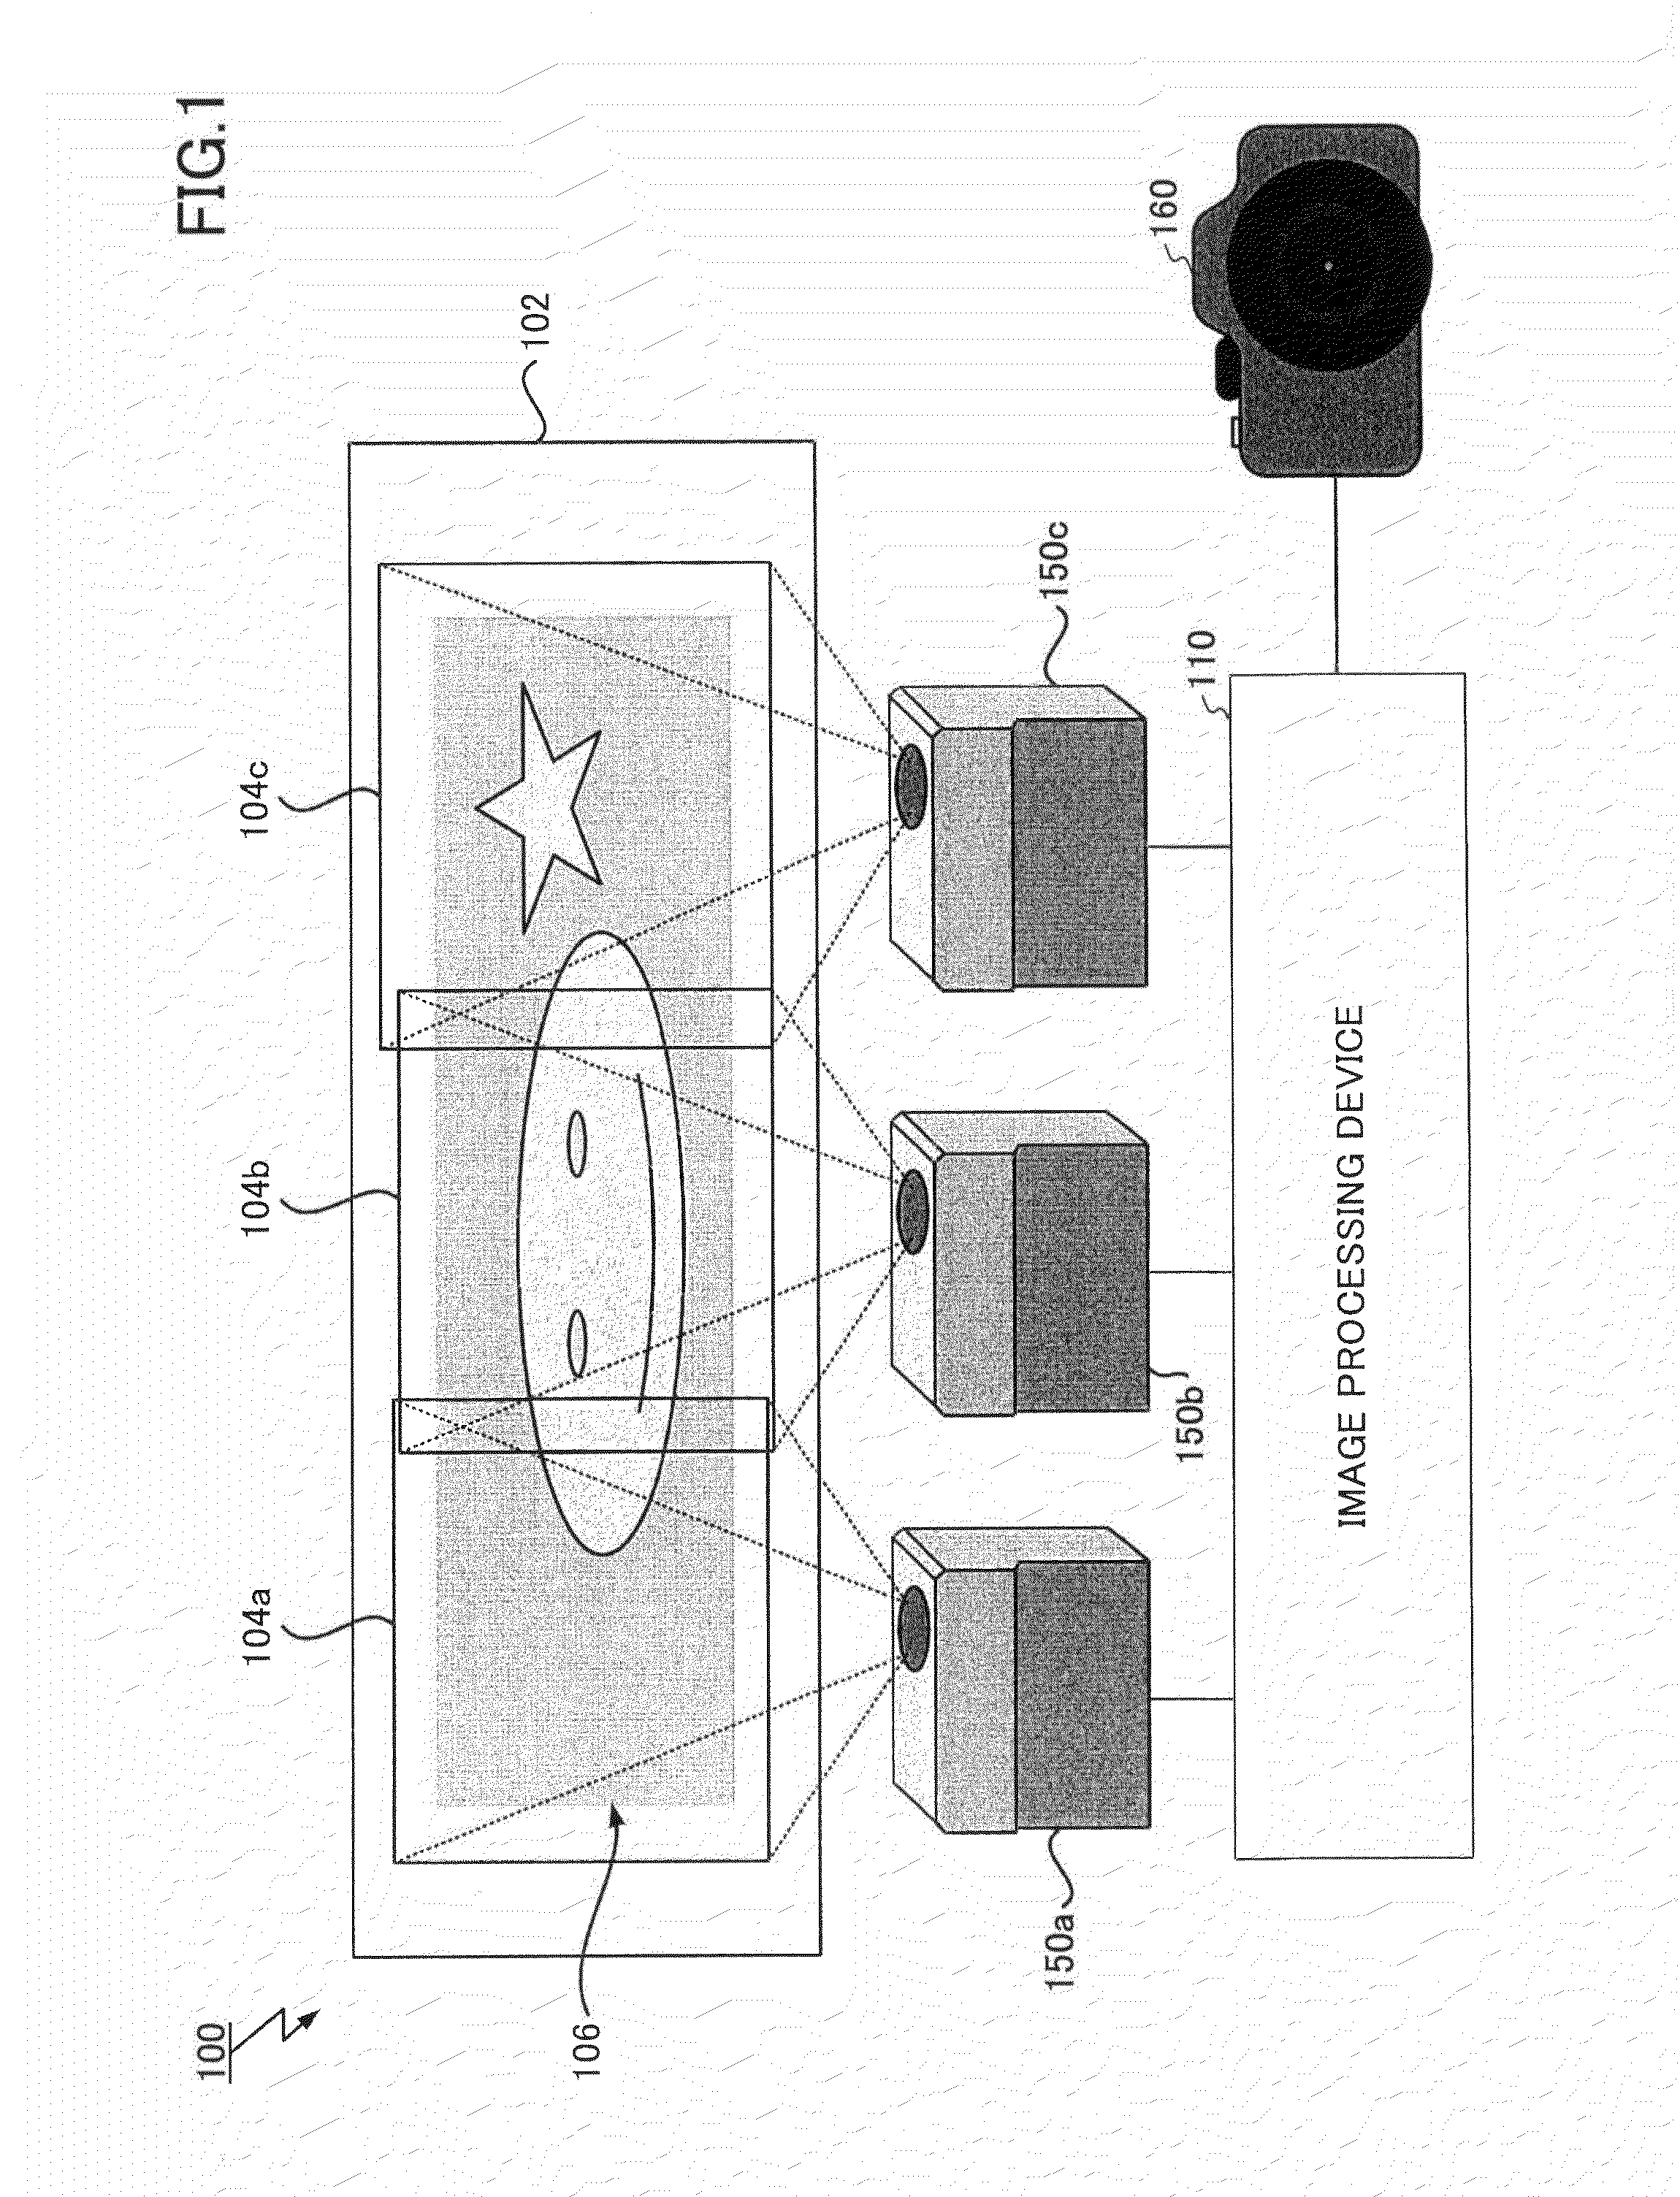 Projection system, image processing device, and projection method